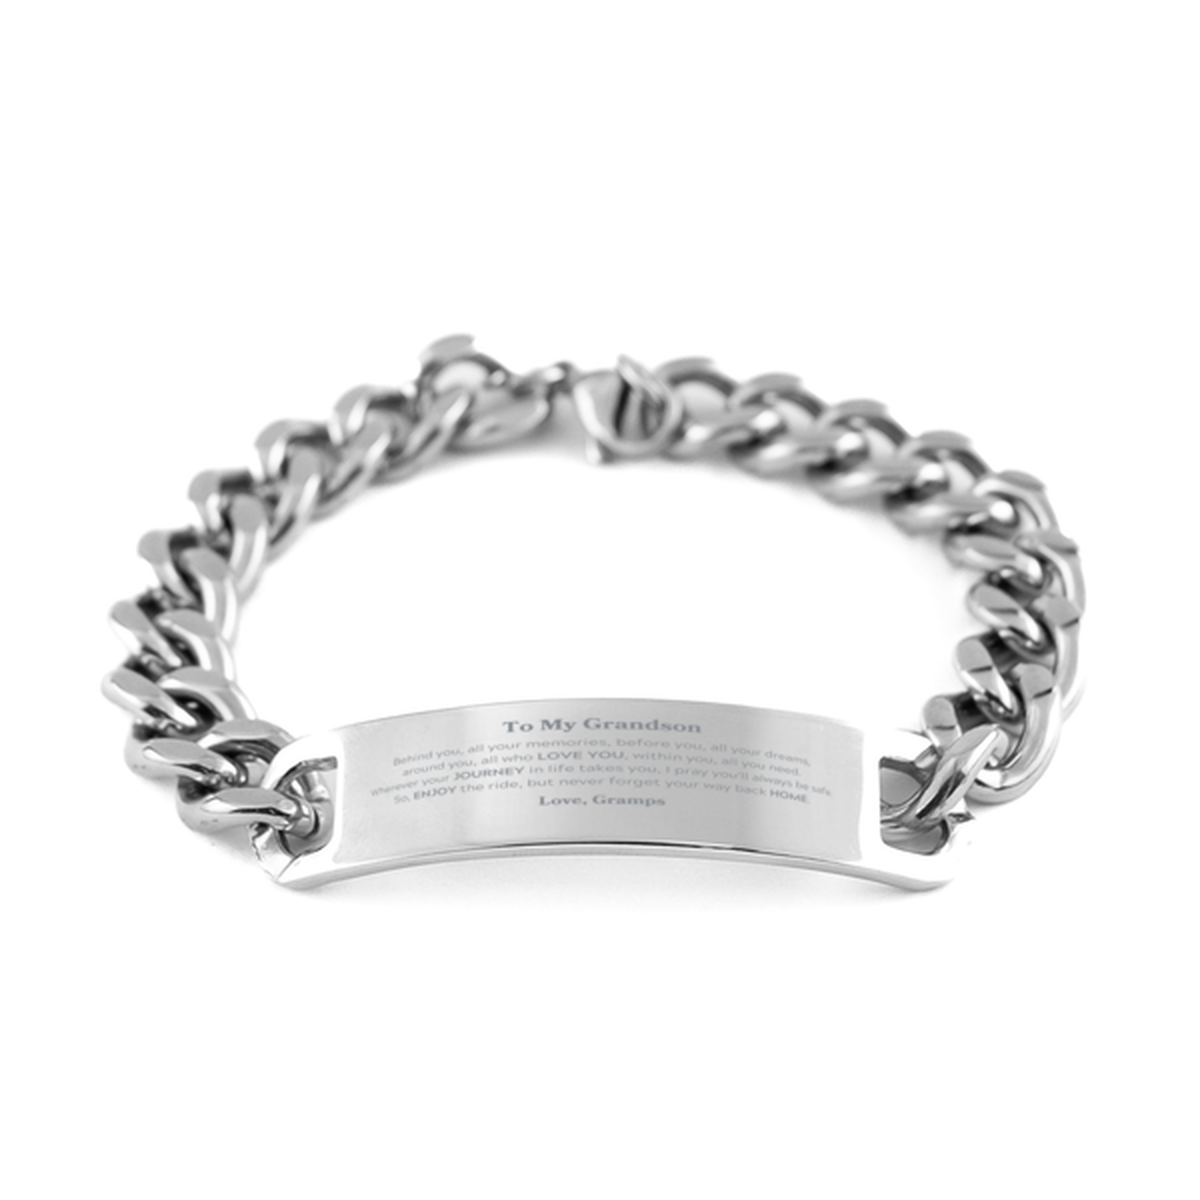 To My Grandson Graduation Gifts from Gramps, Grandson Cuban Chain Stainless Steel Bracelet Christmas Birthday Gifts for Grandson Behind you, all your memories, before you, all your dreams. Love, Gramps